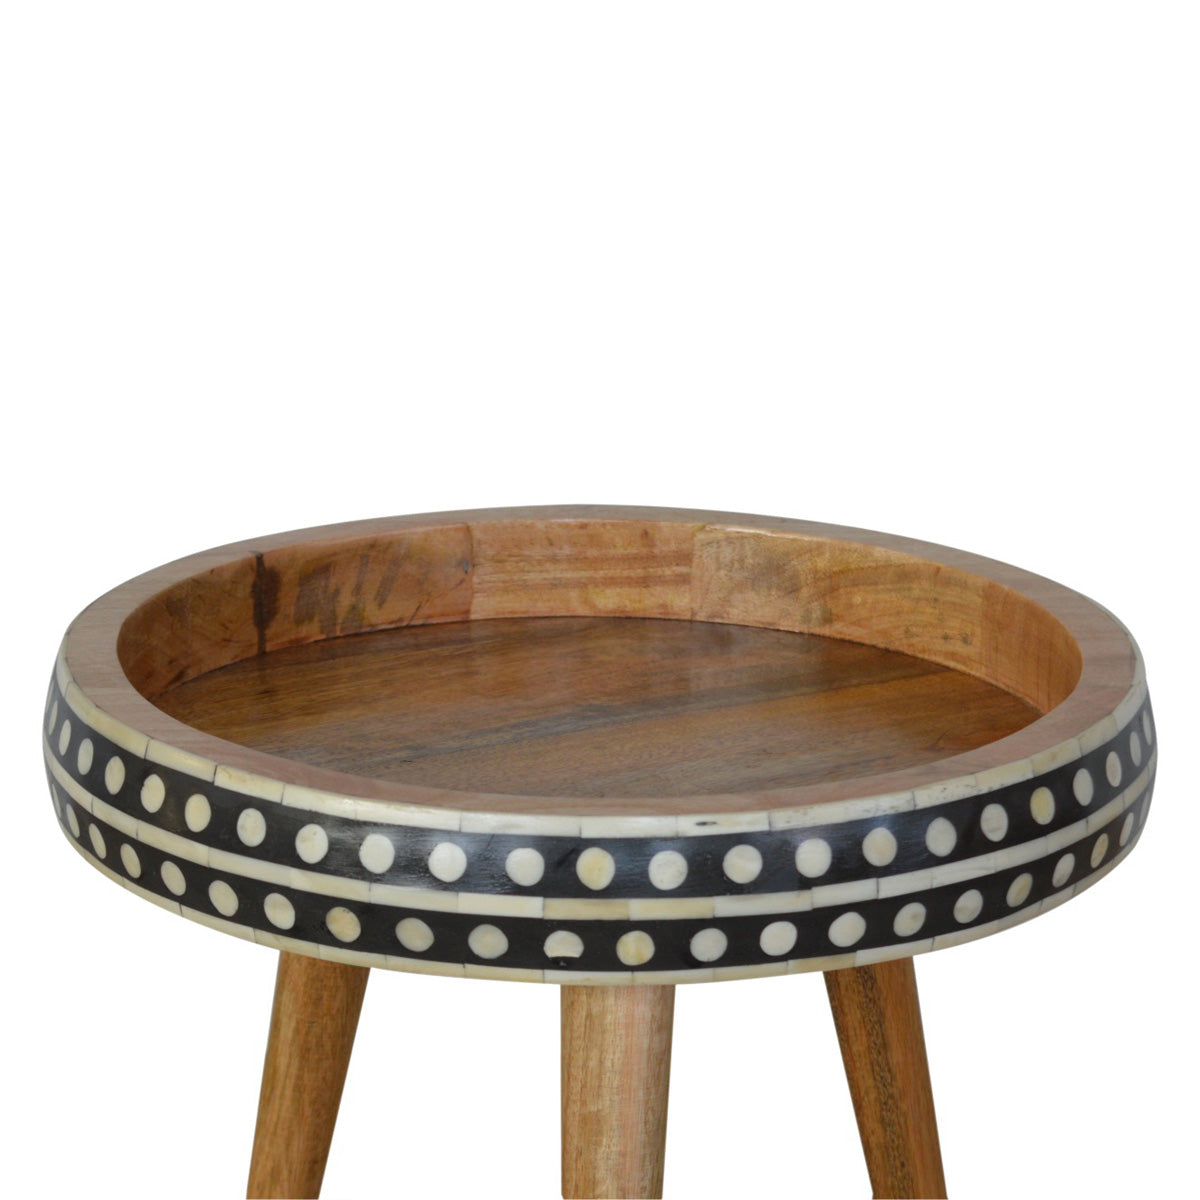 Small Dotted End Table - Mango Wood